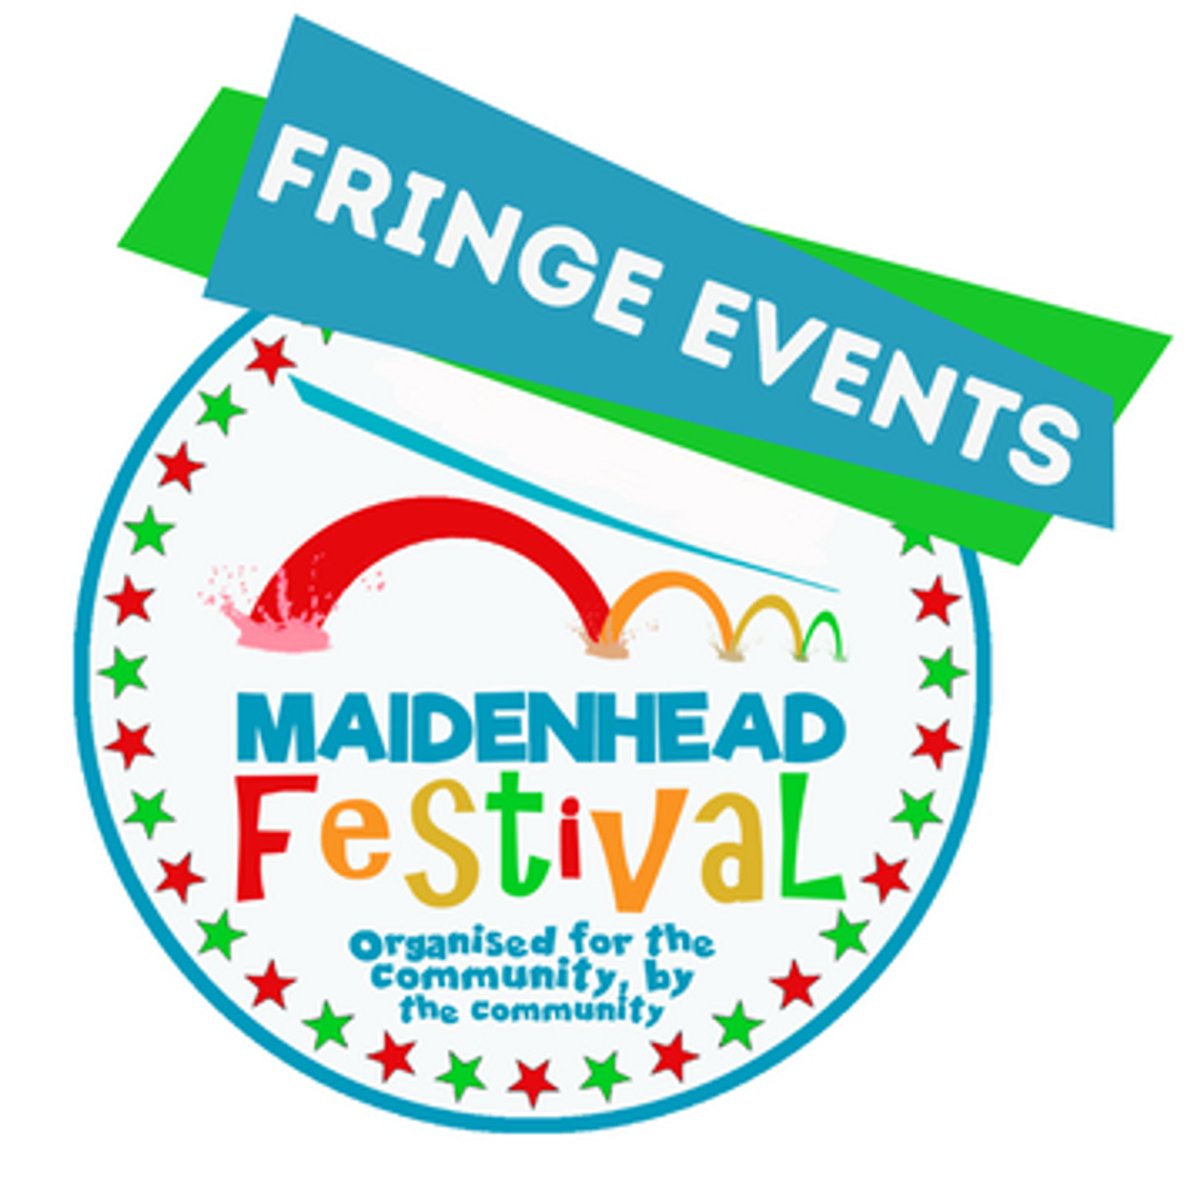 🎶✨ Experience the magic of live music at the Maidenhead Festival Fringe Events! From intimate acoustic sets to energetic rock showcases. Let the music move you and the performances mesmerize you! 🌟🎭 

Find out more at mheadfestival.weebly.com/fringeevents